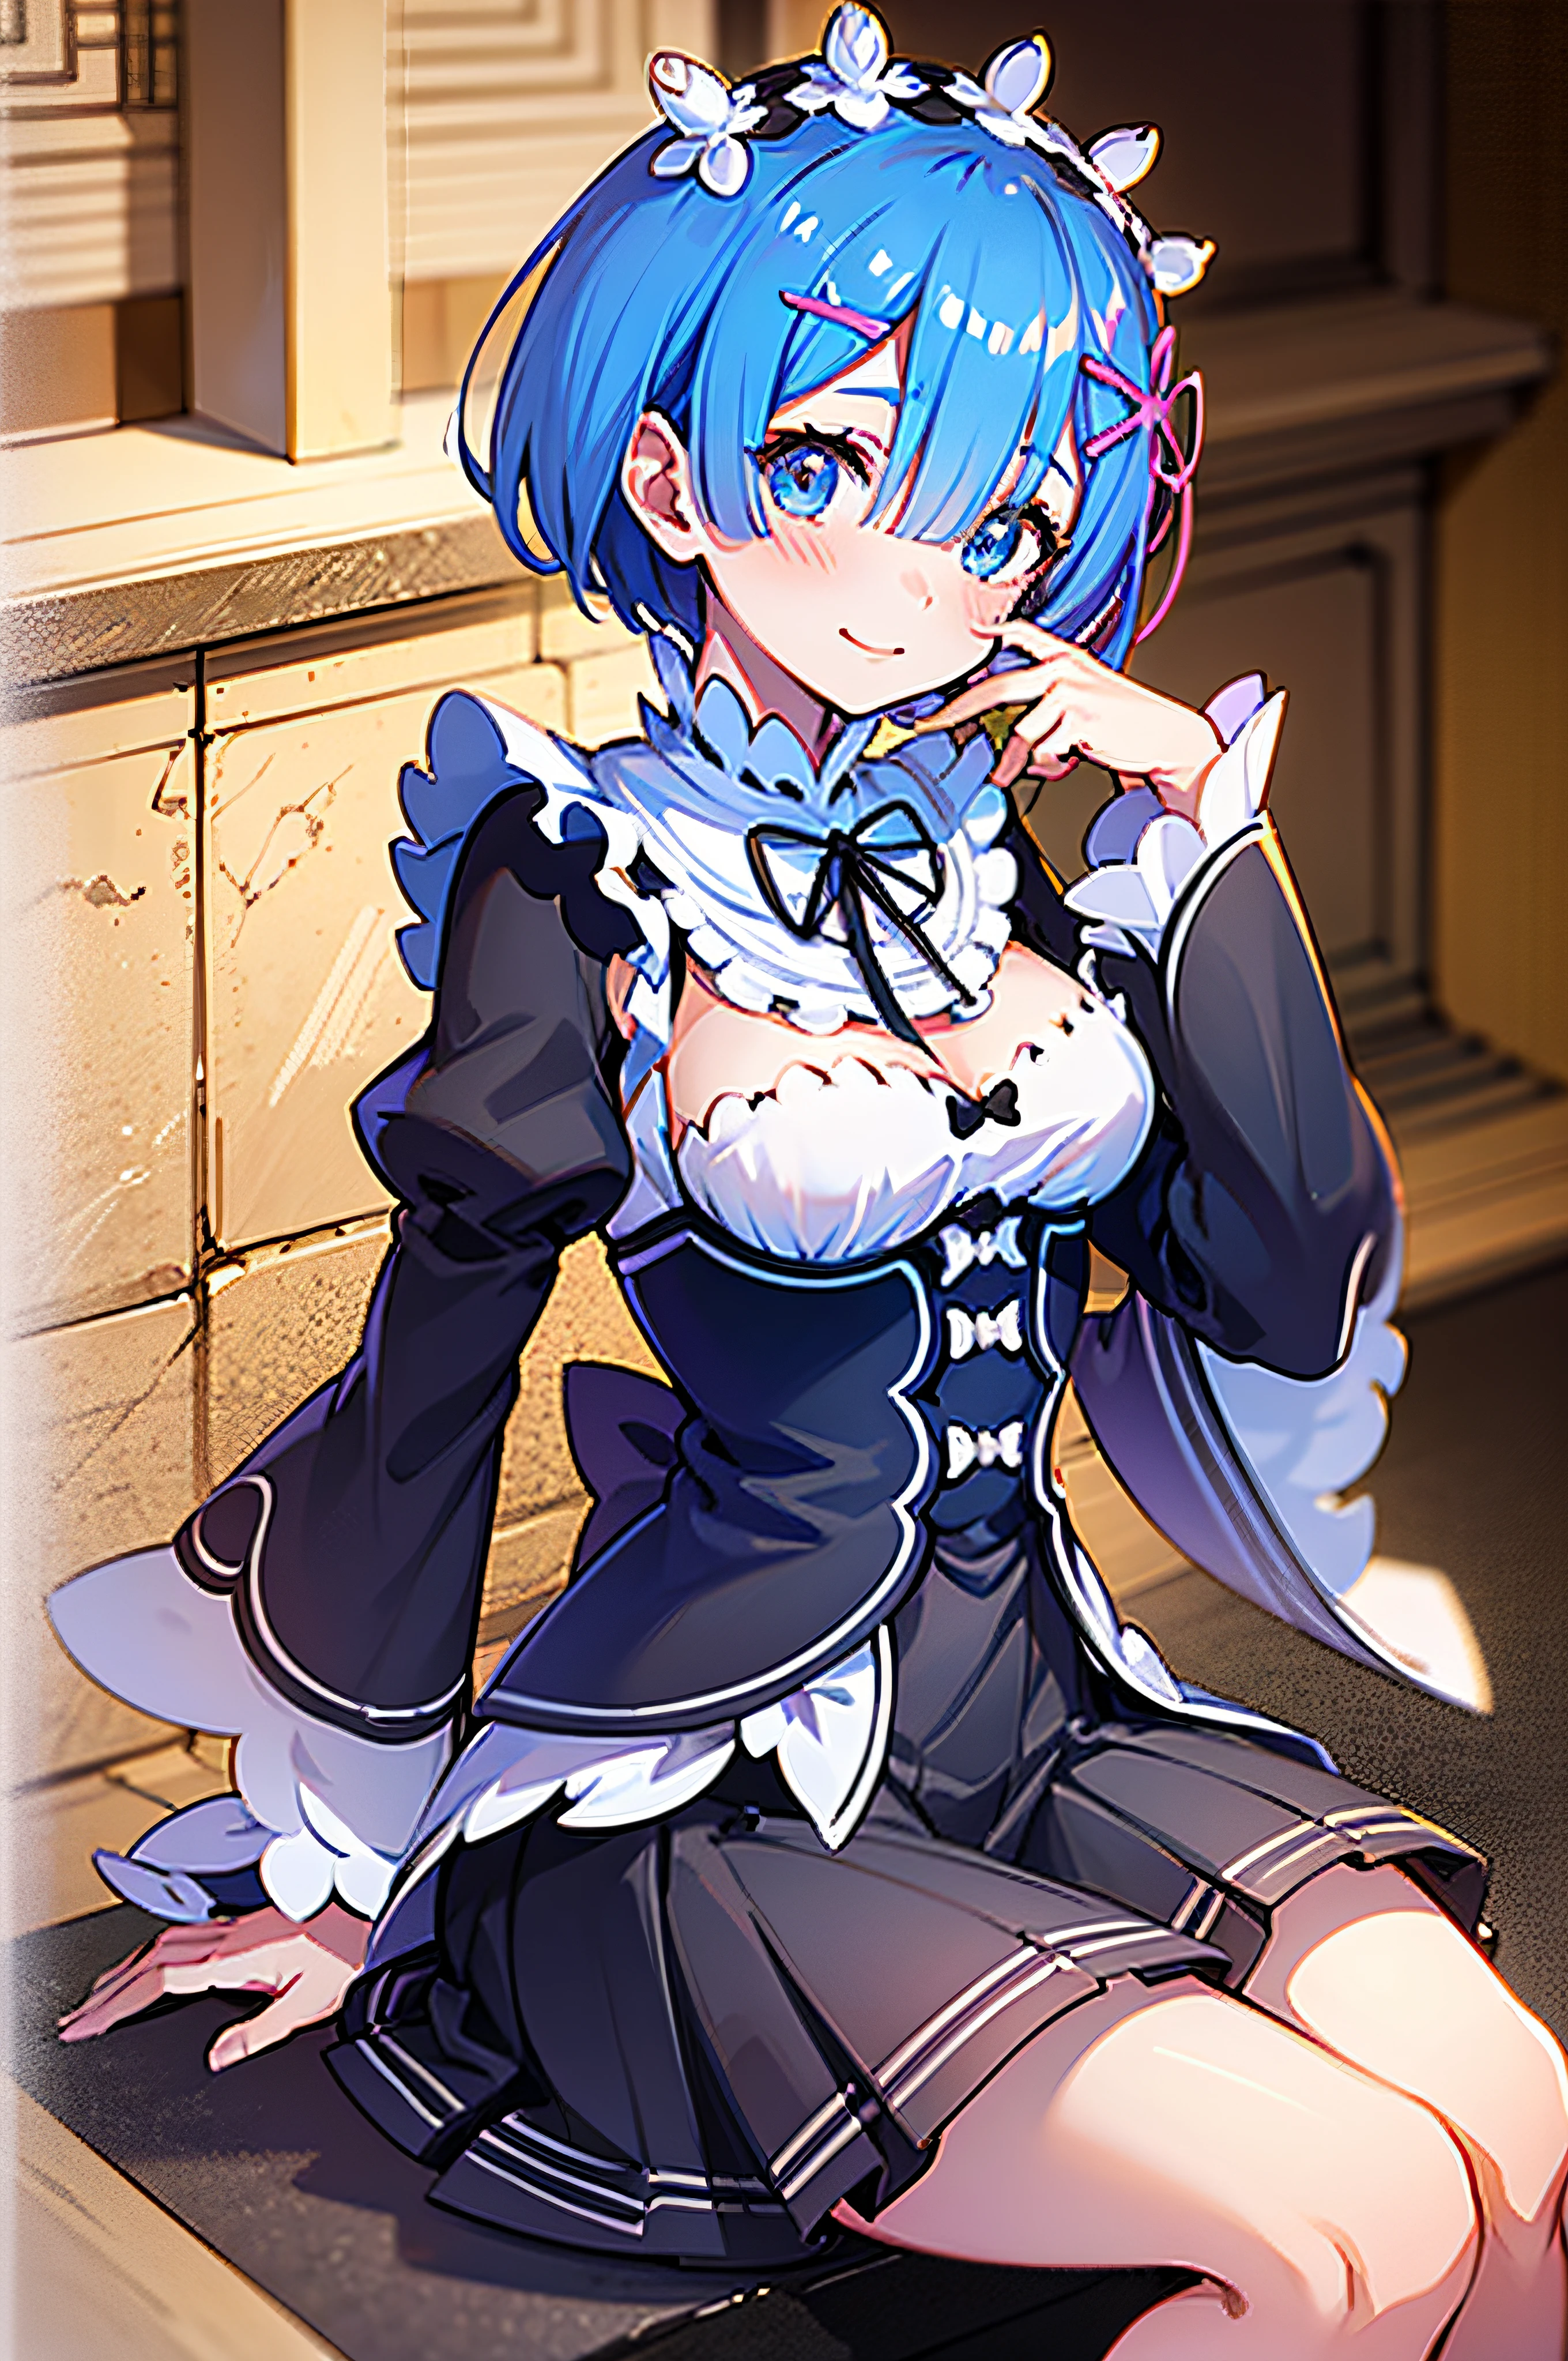 "blue hair, Rem (Re:Zero), [smiling], blushing, castle scenery, masterpiece, best image quality, optimal lighting, a single girl wearing a skirt, with medium-sized breasts, shy expression